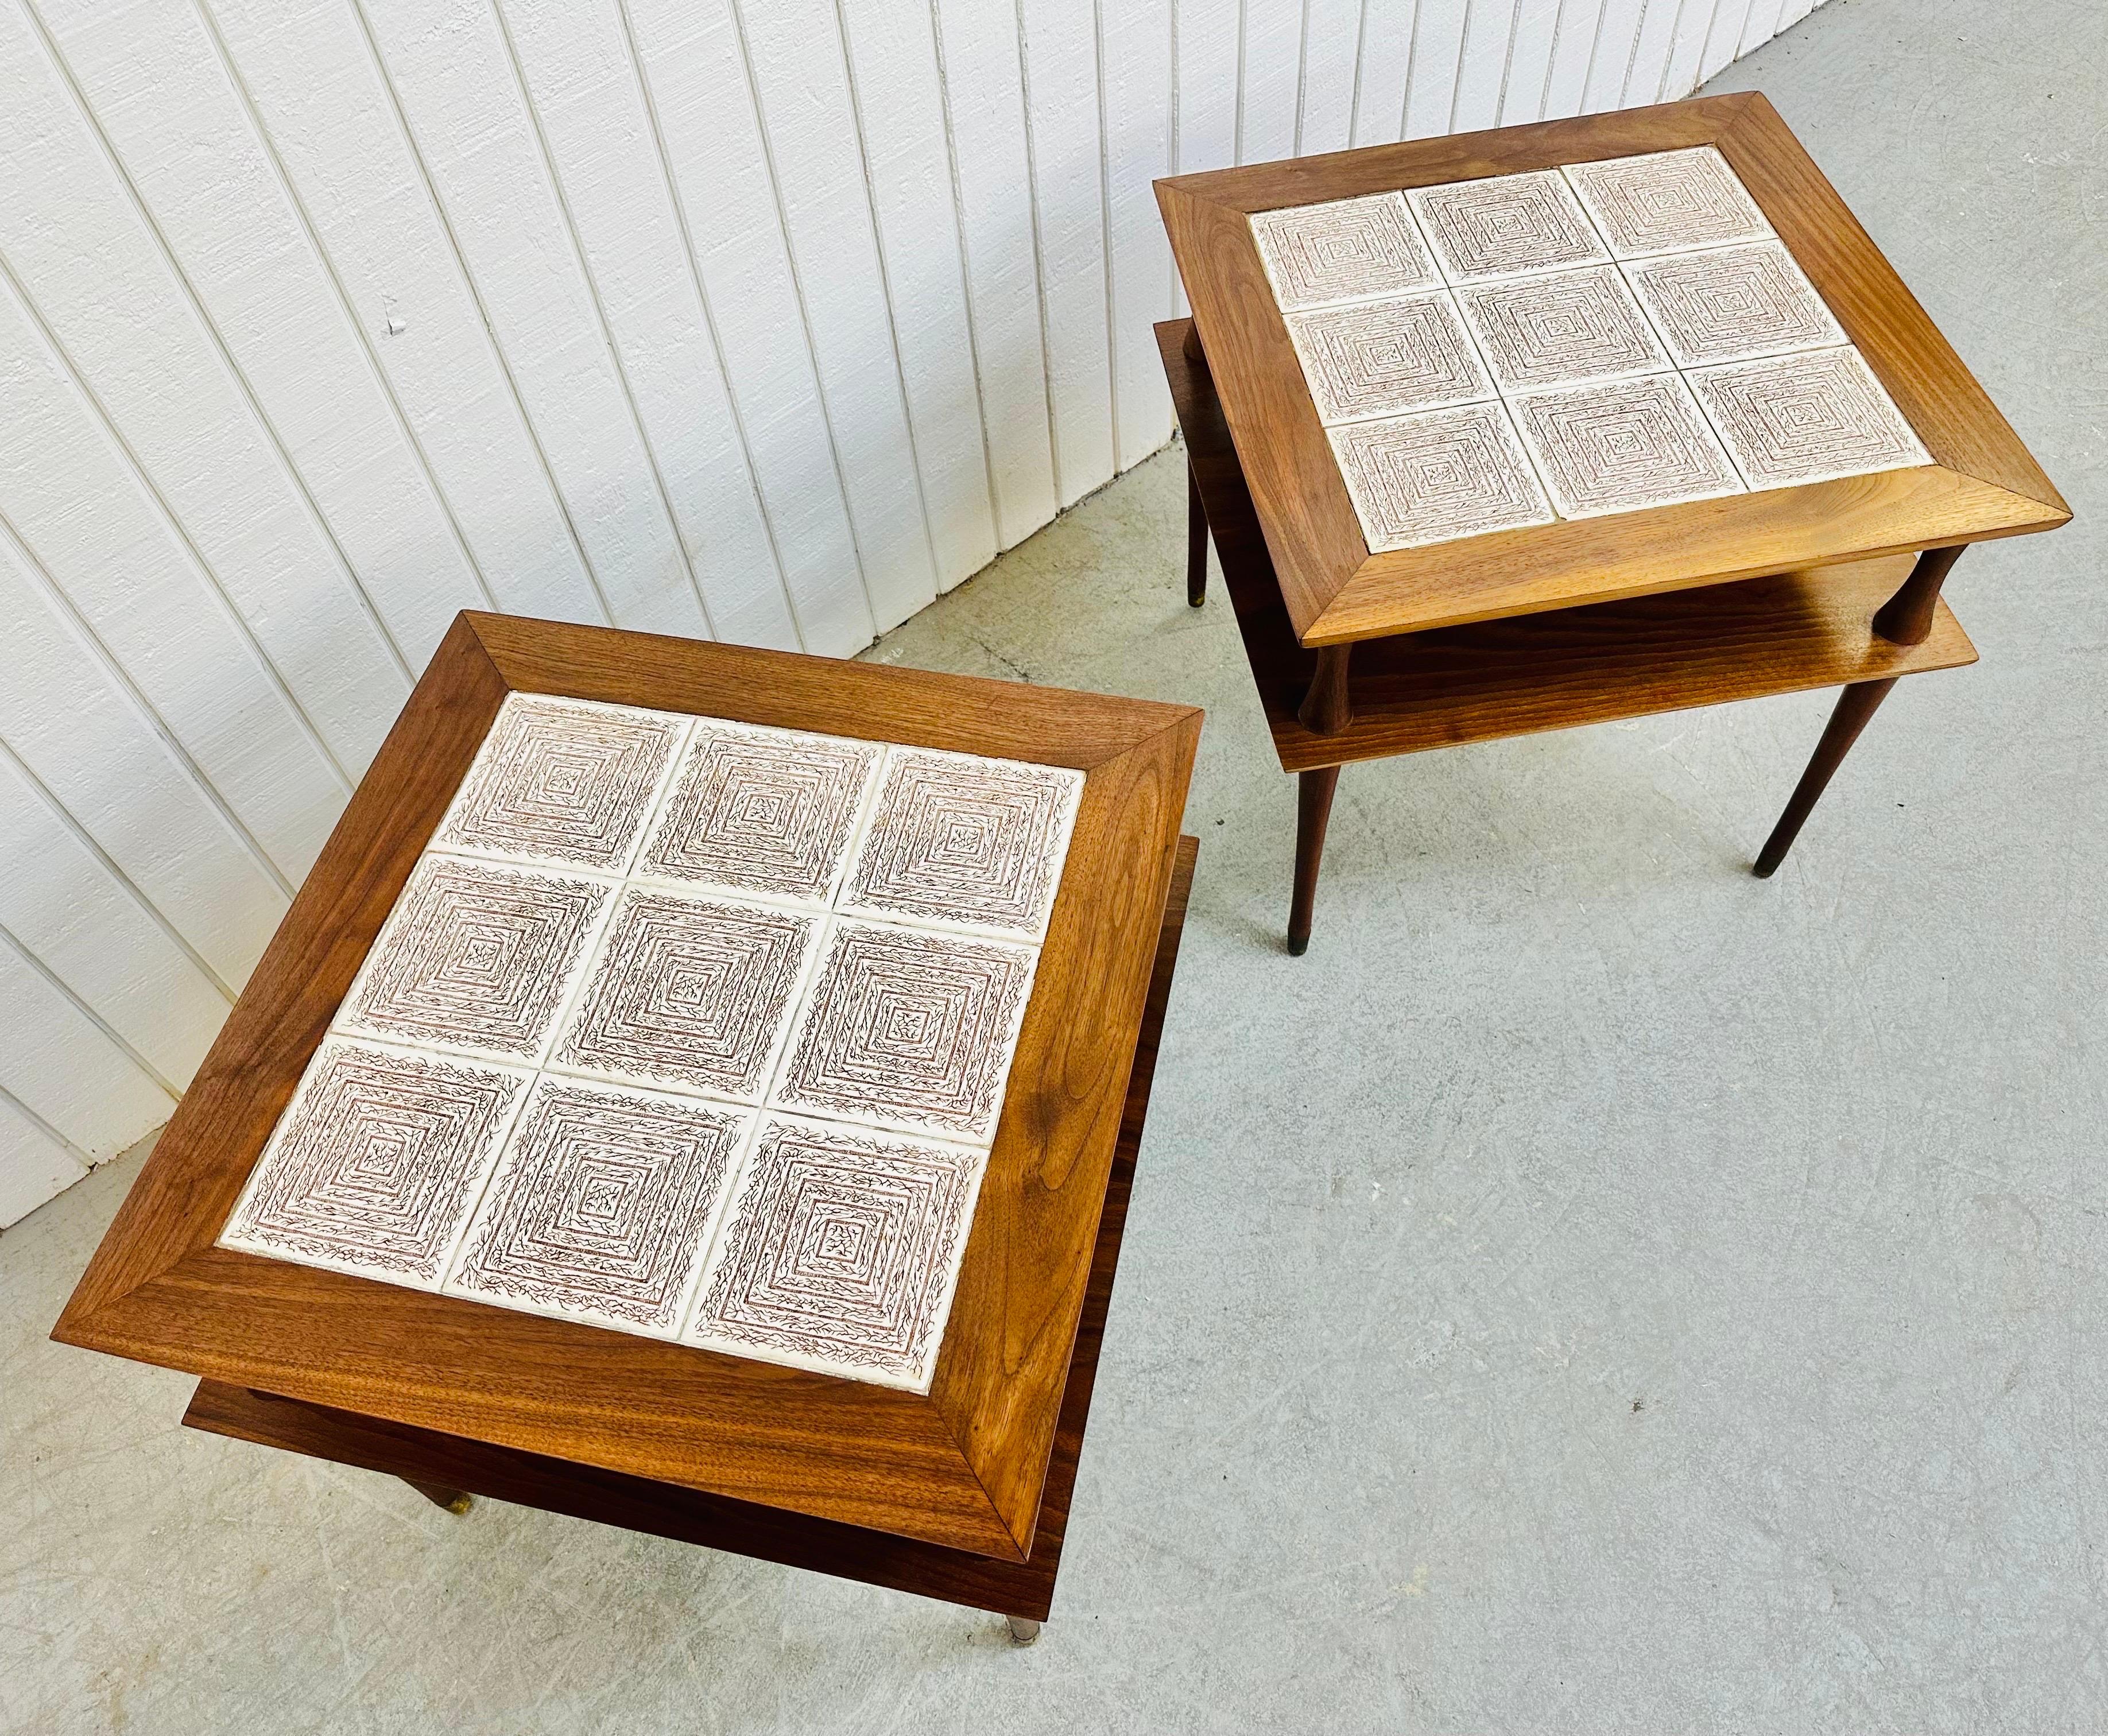 This listing is for a pair of Mid-Century Modern Walnut Tile Top Side Tables. Featuring a straight line square top design, bottom shelf for storage, original tiled top, long modern legs, and a beautiful walnut finish. This is an exceptional